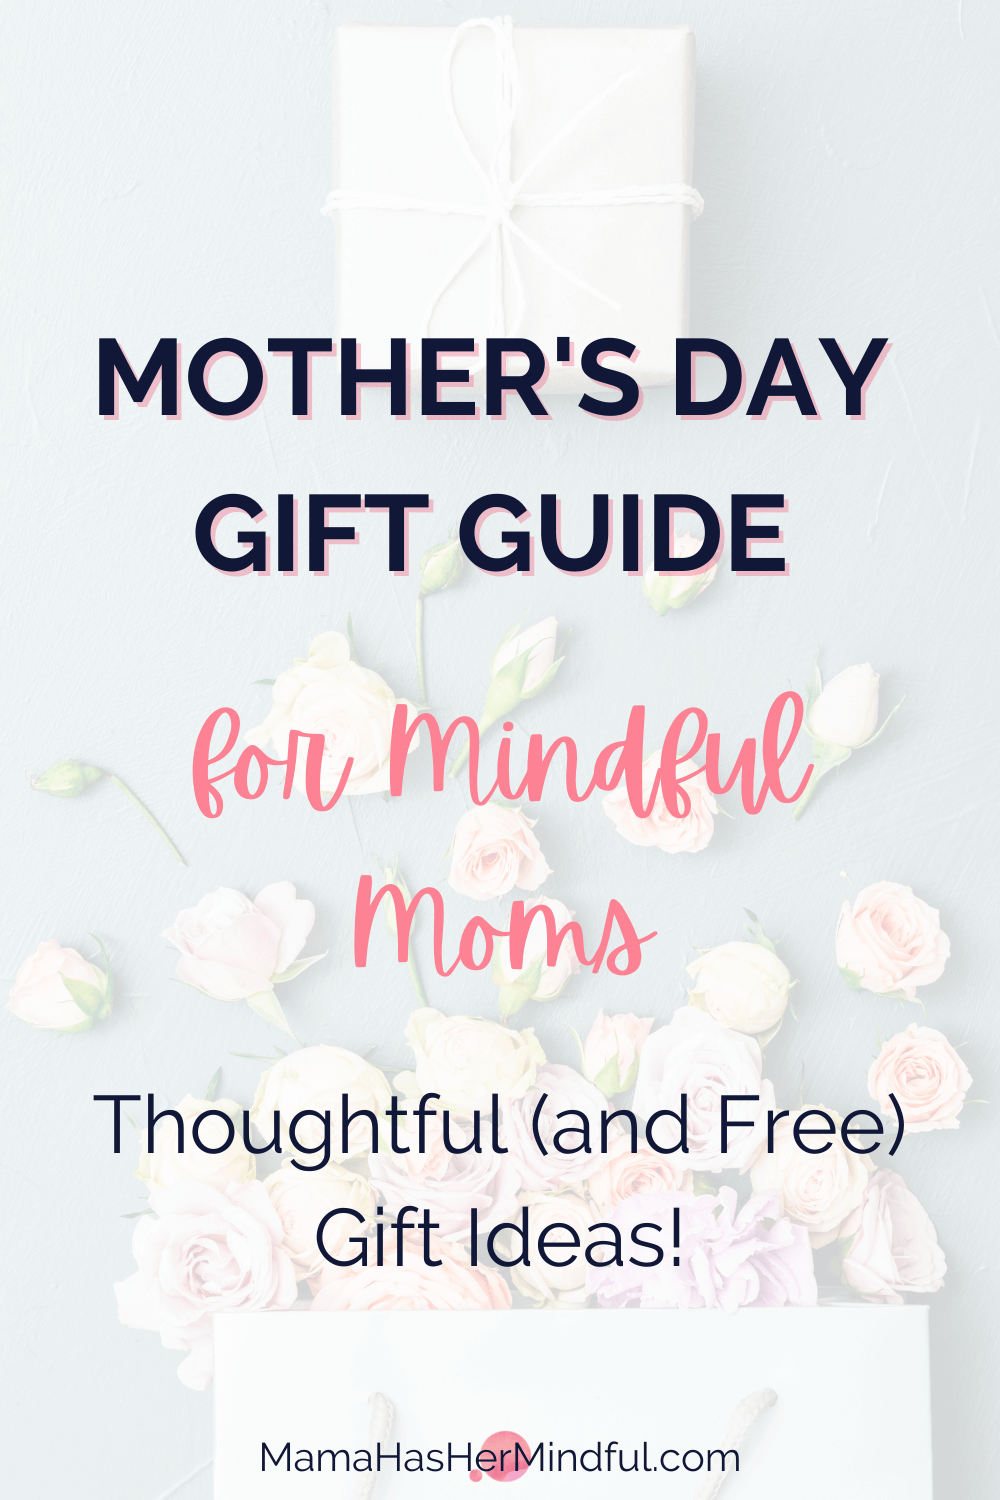 Mother’s Day Gift Ideas for Mindful Moms | Mama Has Her Mindful